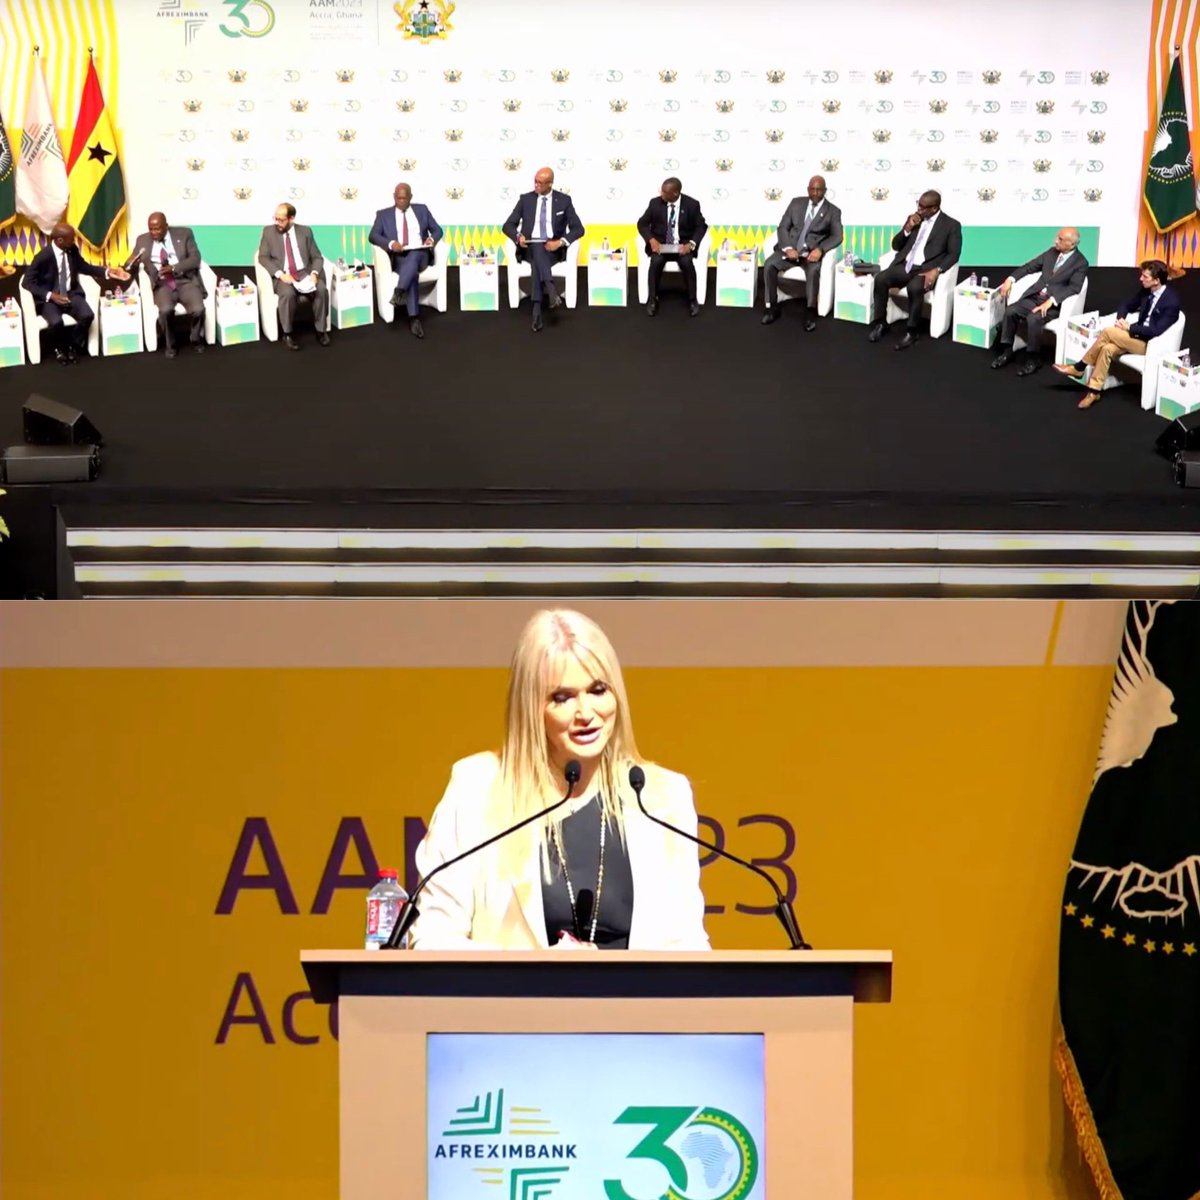 Time is the most precious commodity. 10panelists in 61minutes and 12seconds. It can be done. #aam2023 Accra, Ghana